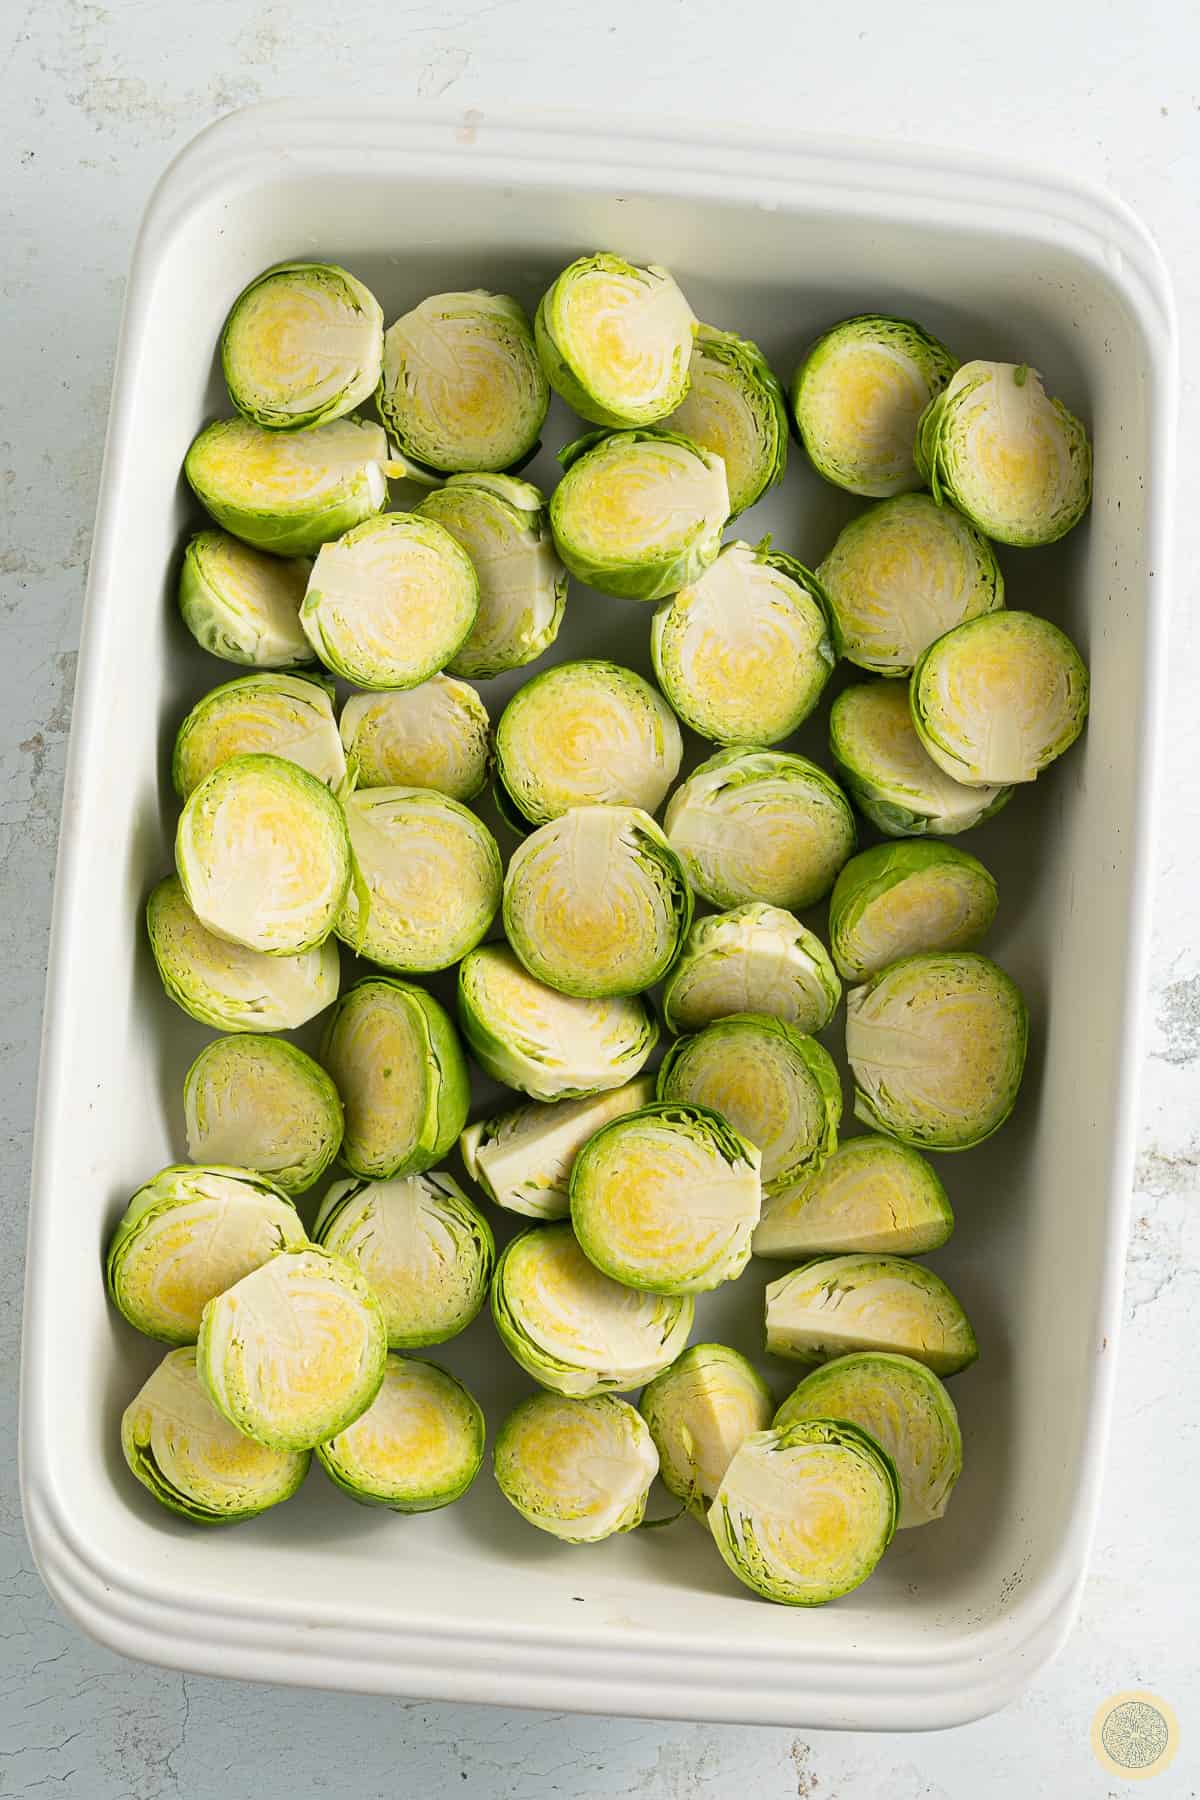 How to roast brussel sprouts